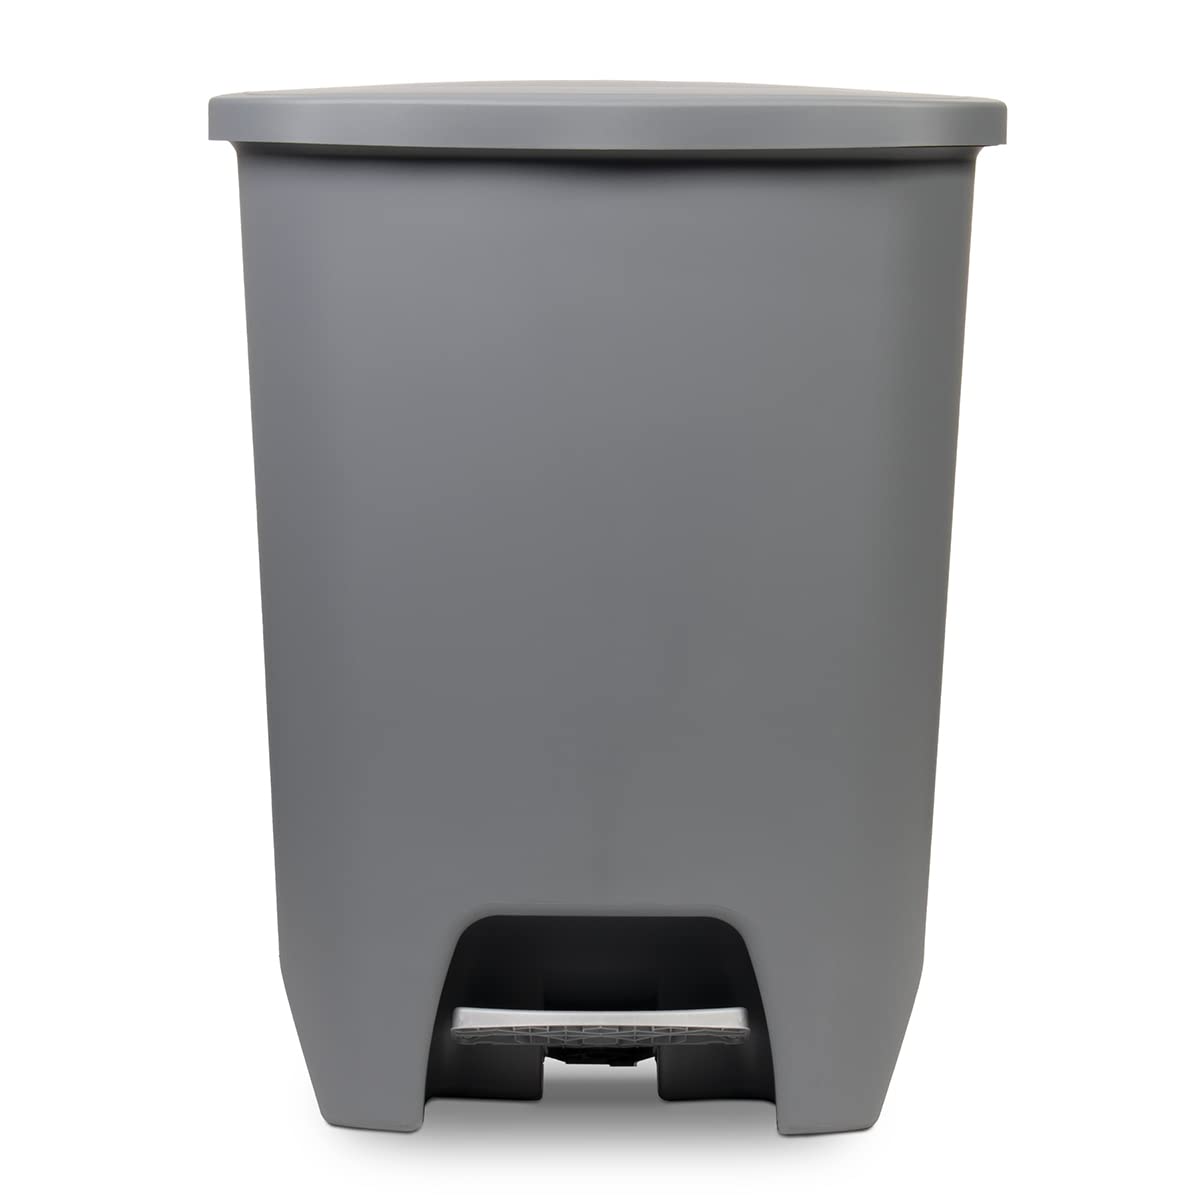 https://bigbigmart.com/wp-content/uploads/2023/10/Glad-Kitchen-Trash-Can-Large-Plastic-Waste-Bin-with-Odor-Protection-of-Lid-Hands-Free-with-Step-On-Foot-Pedal-and-Garbage-Bag-Rings-20-Gallon-Grey4.jpg